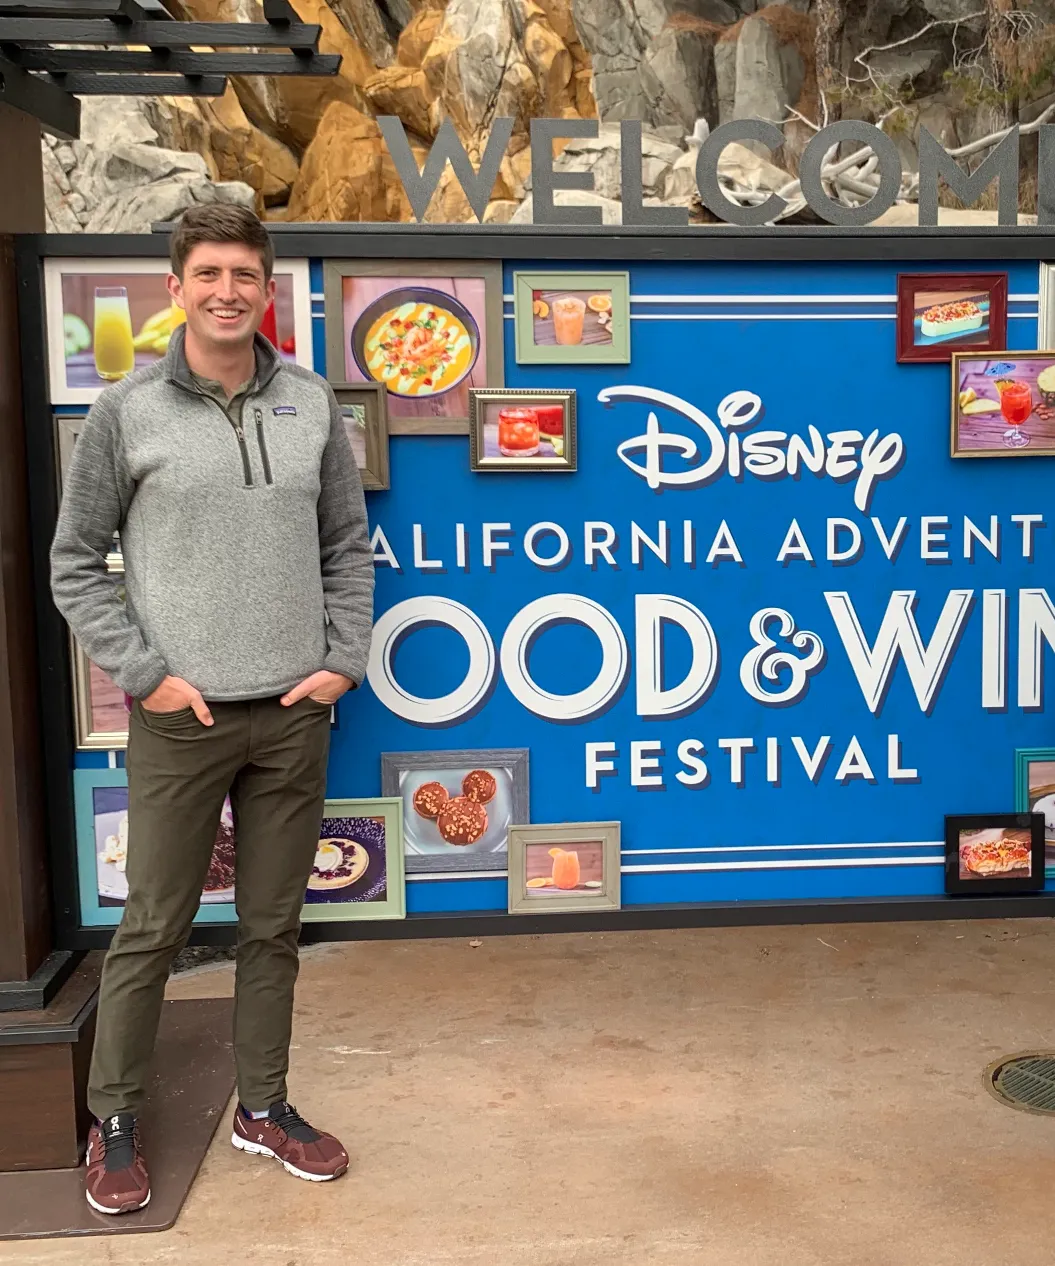 Gavin at the Disney Food and Wine Festival.